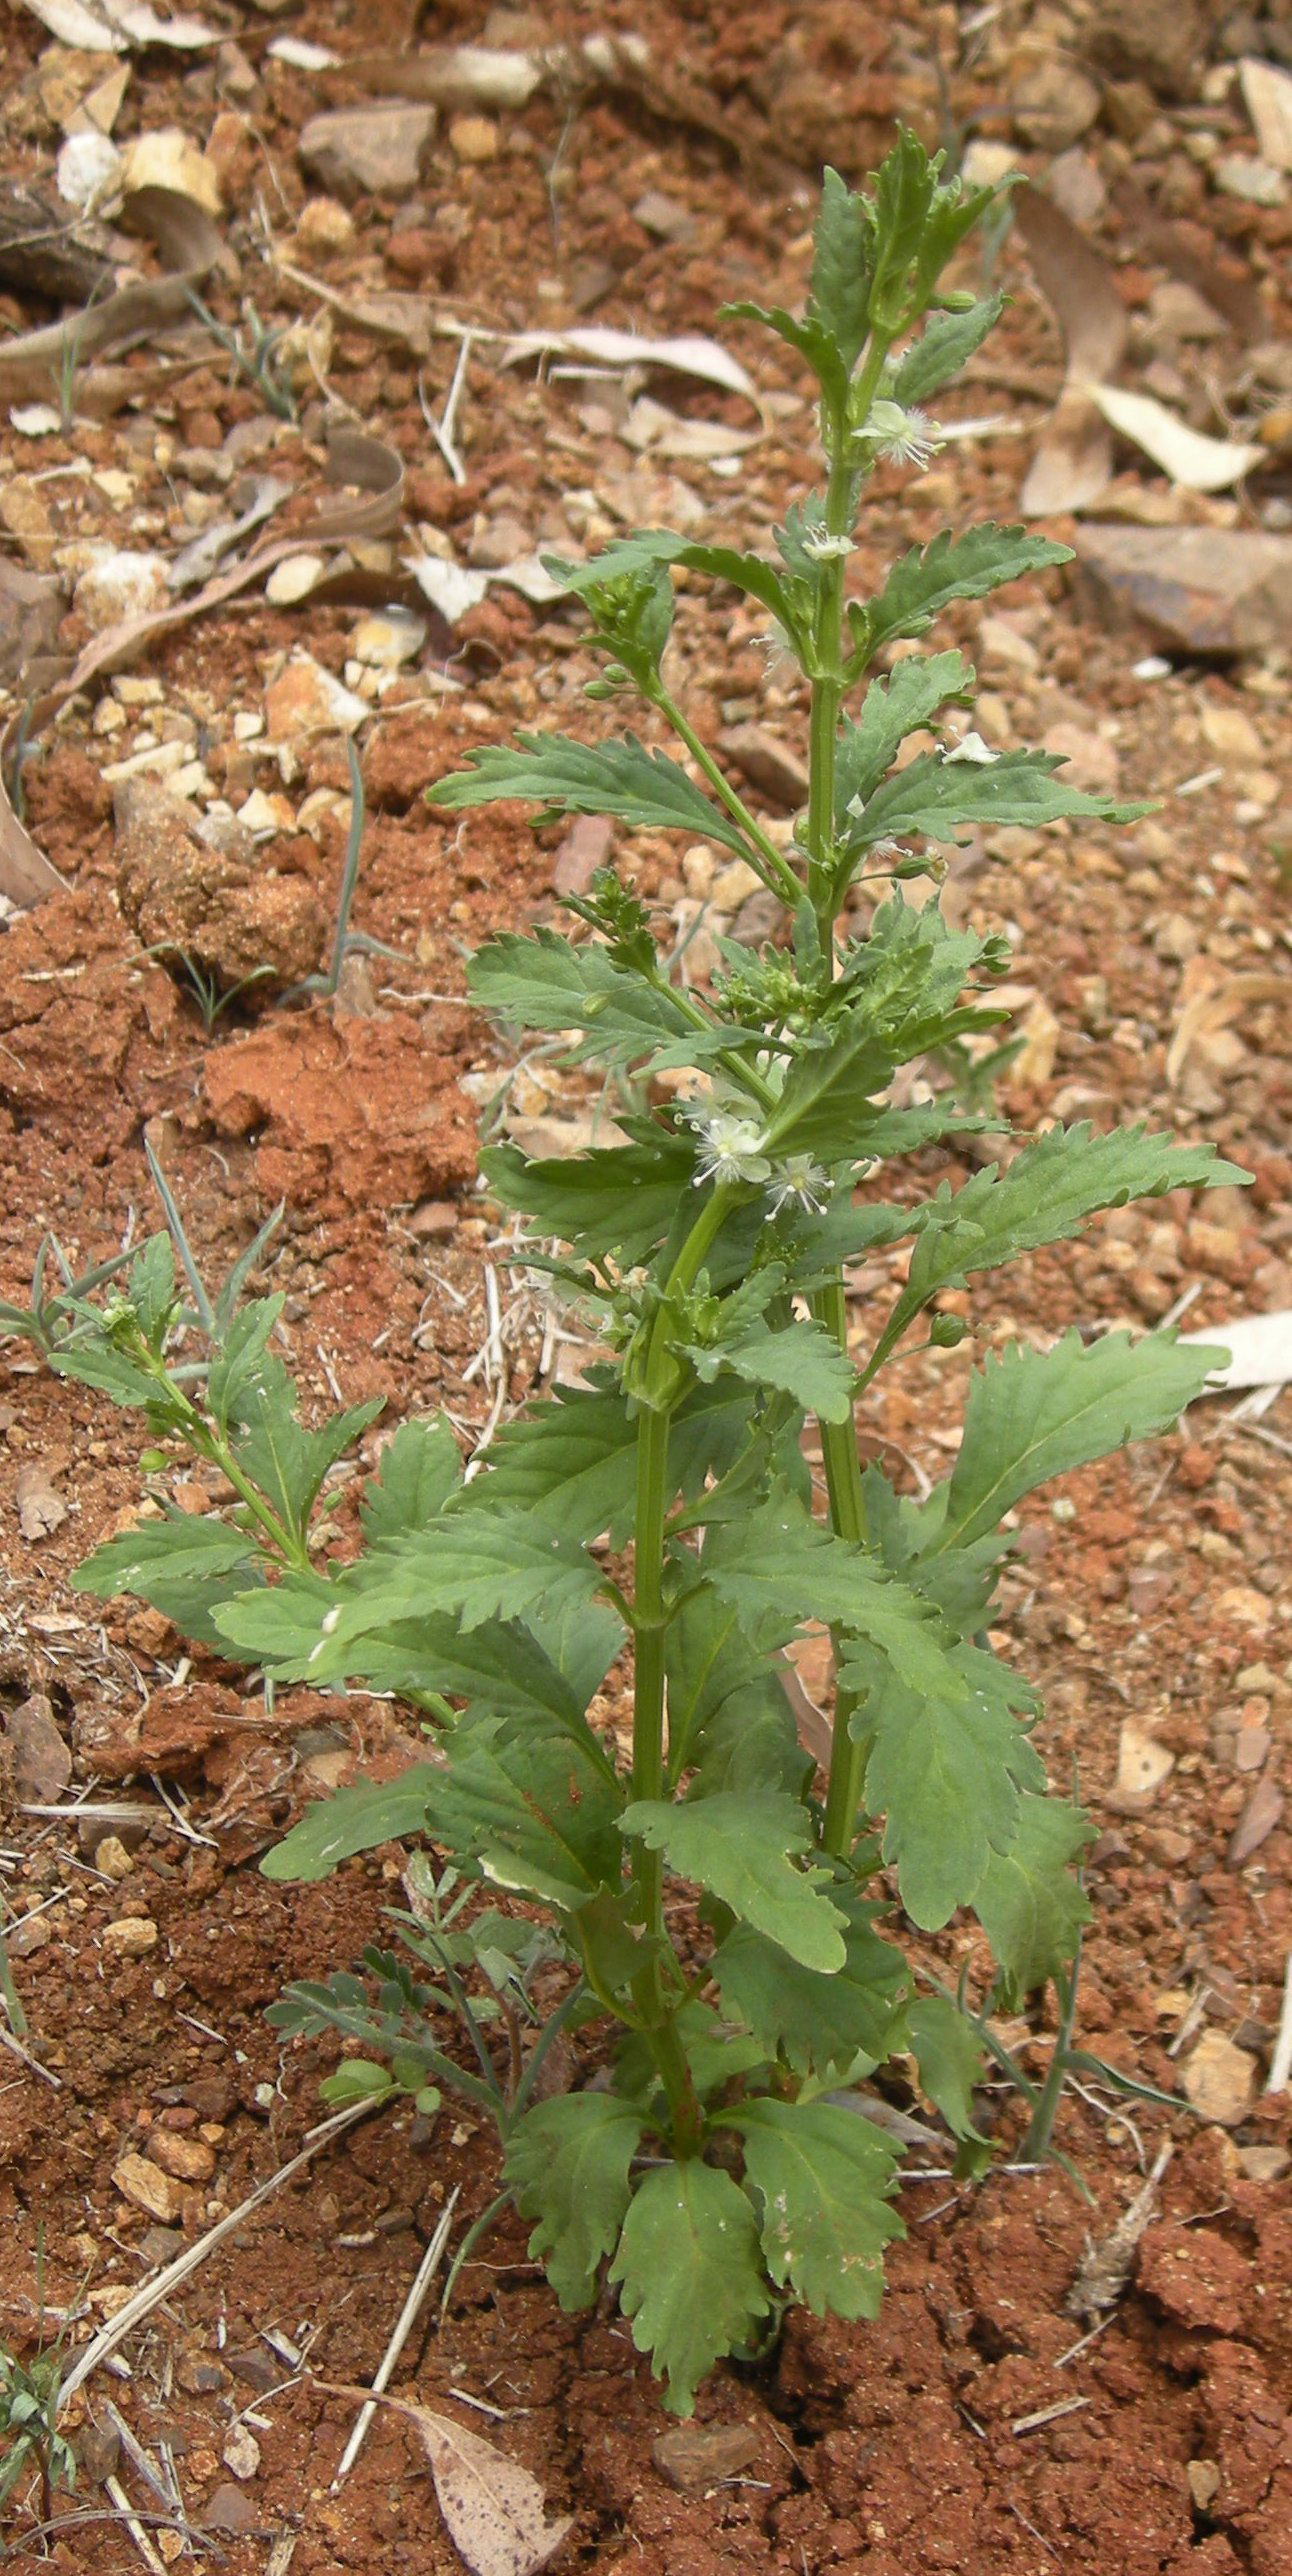 Scoparia-weed-plant